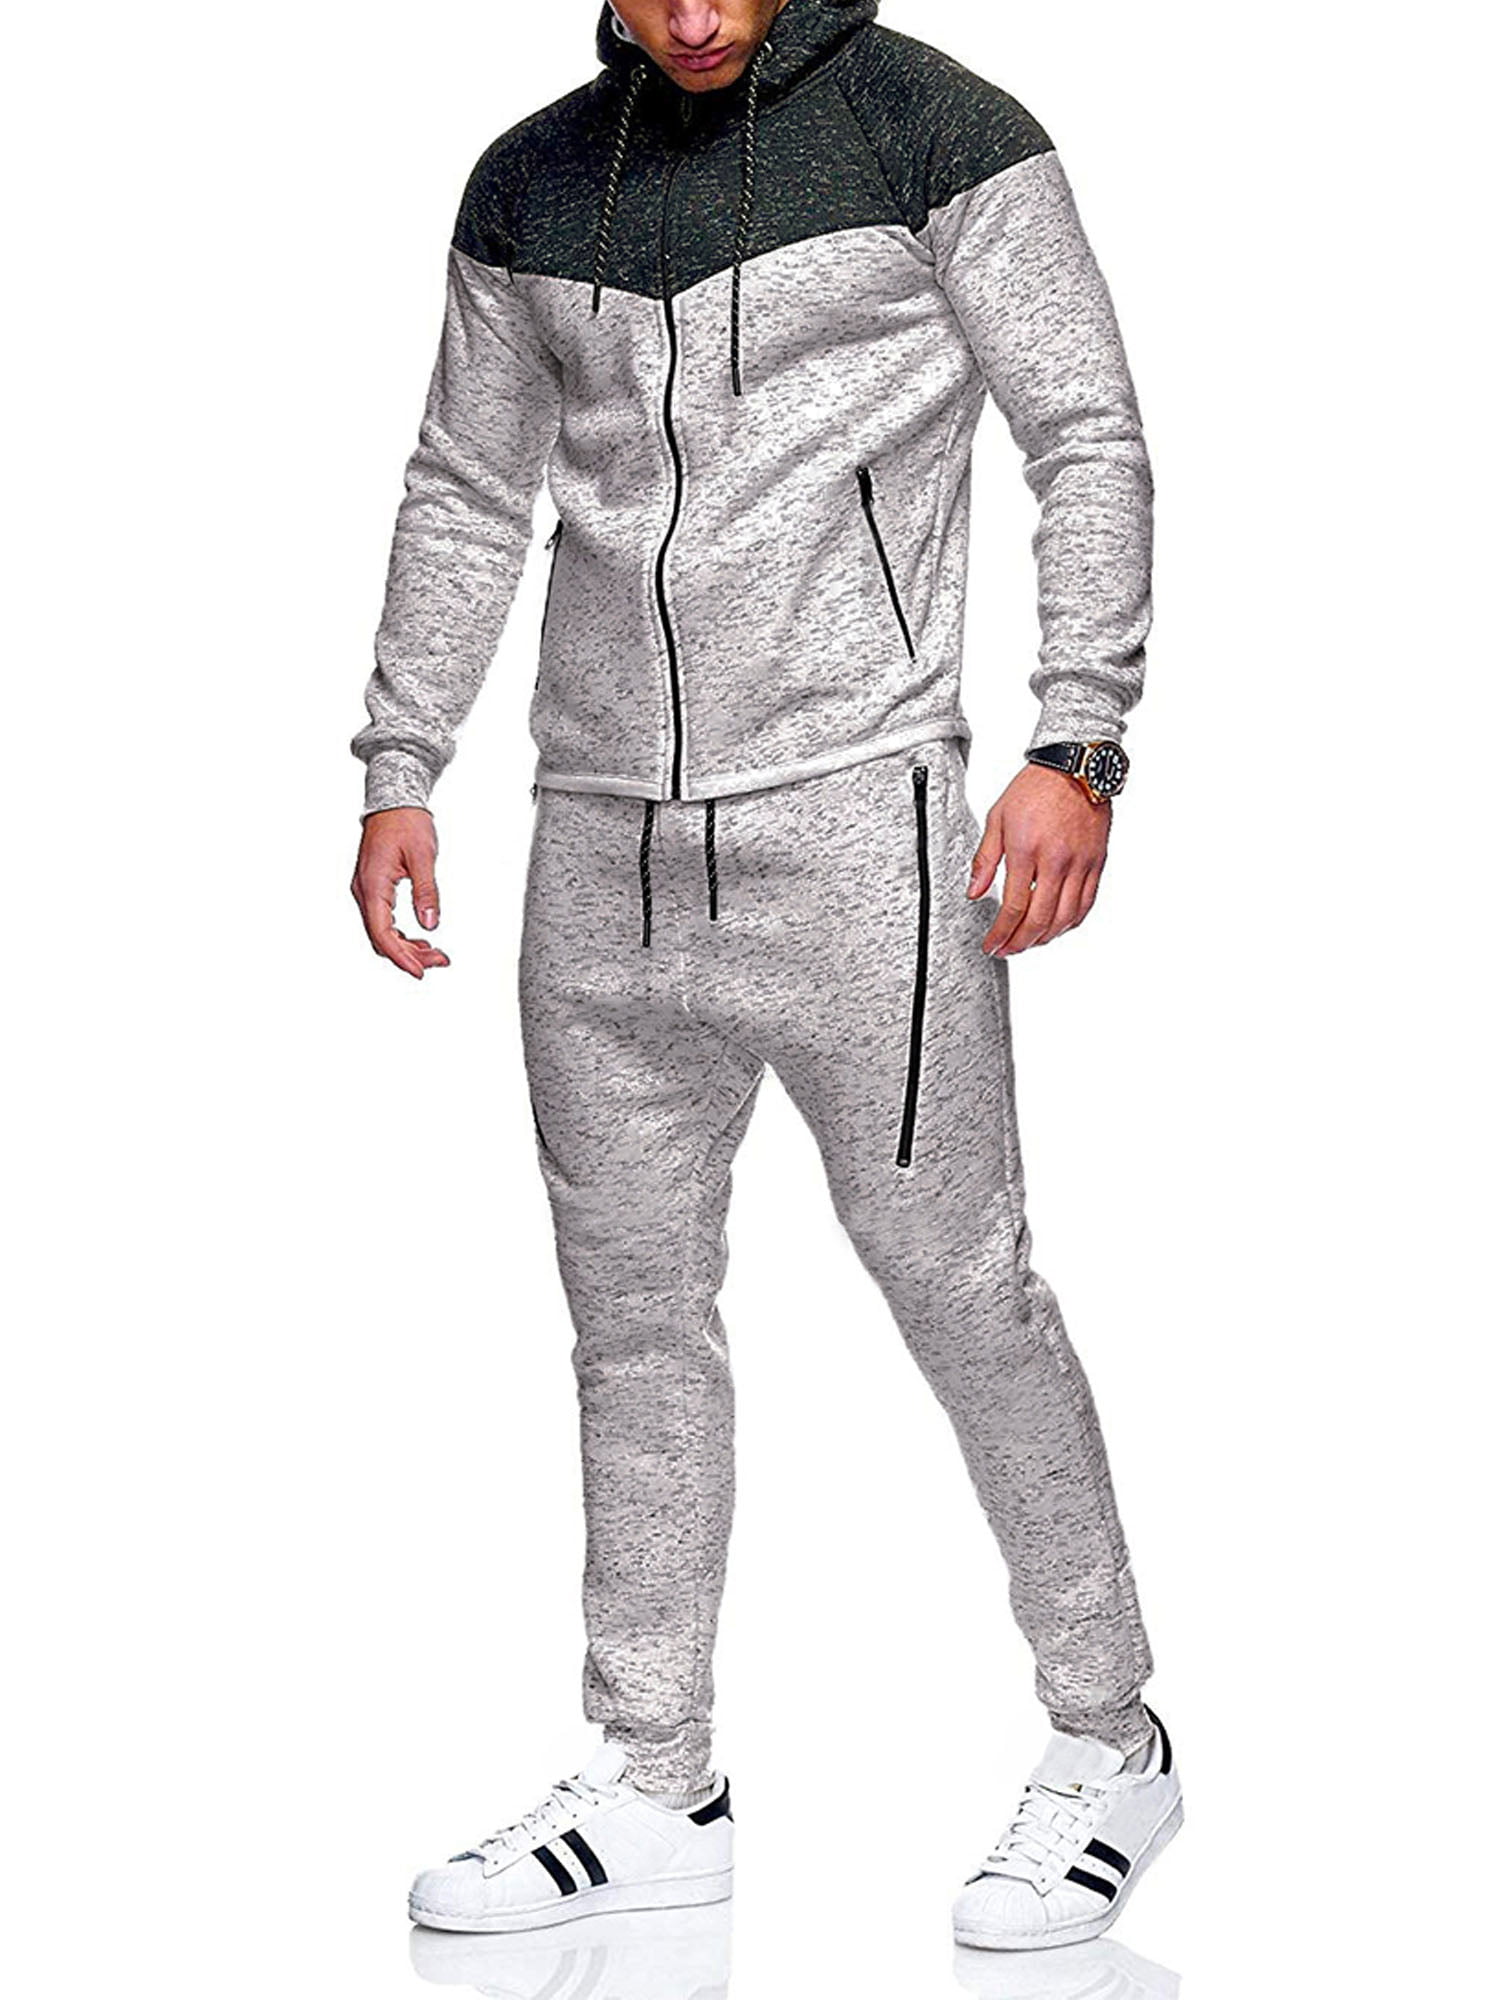 X-Future Men 2 Piece Hooded Thicken Sports Winter Athletic Lined Tracksuit Outfit Set